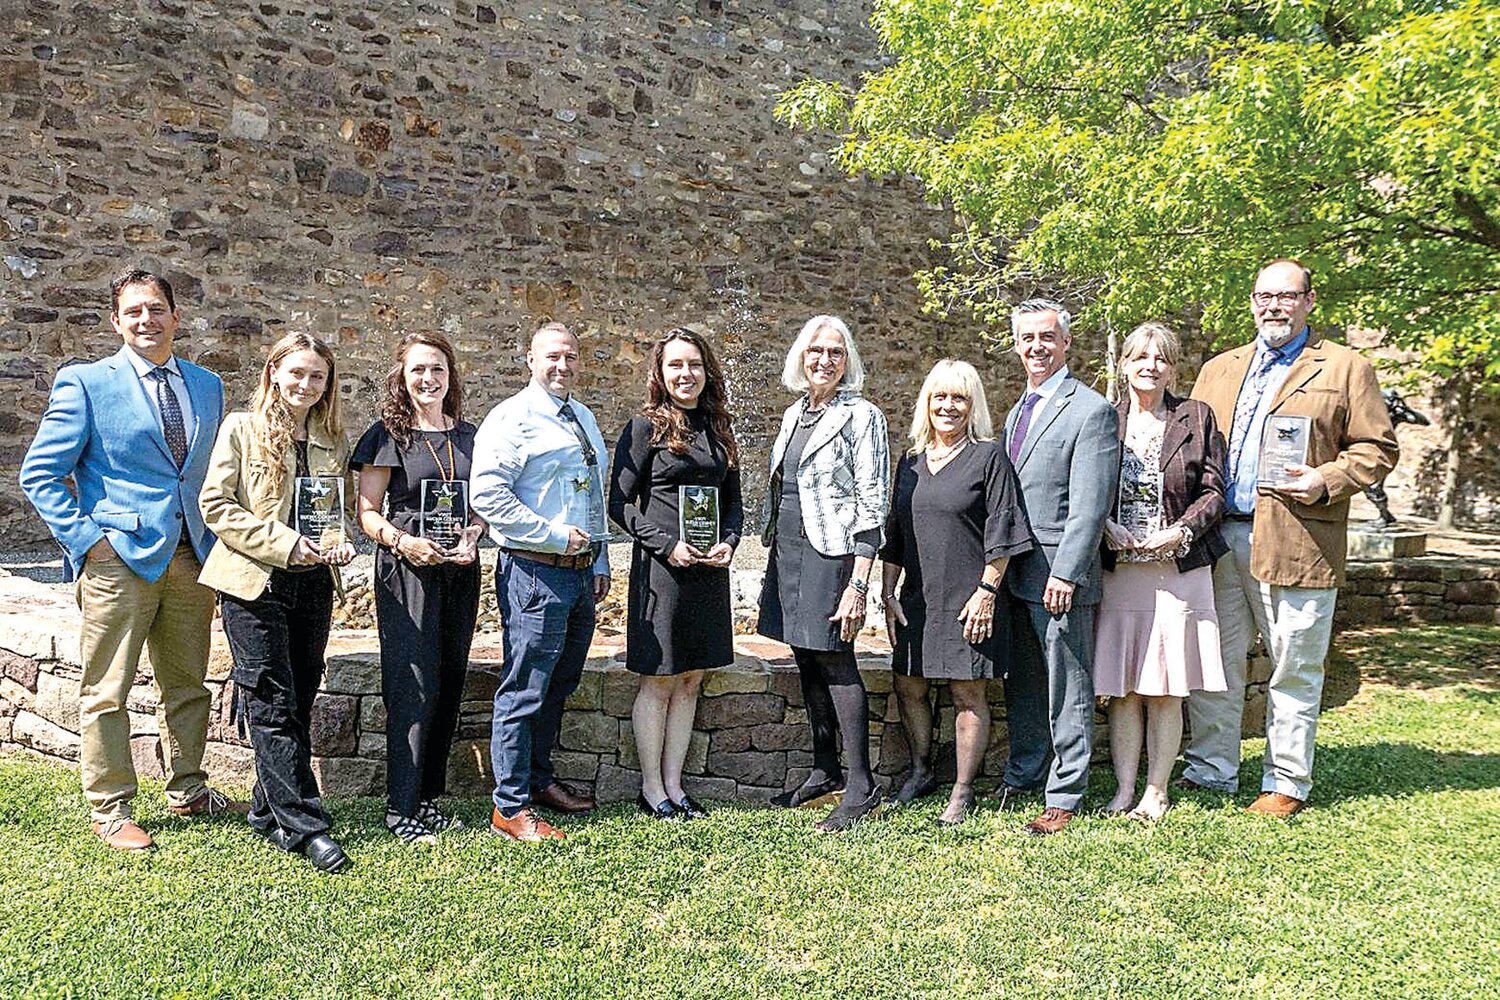 Visit Bucks County (VBC) presented individuals and organizations with awards during National Travel & Tourism Week (NTTW) during a celebration at the James A. Michener Art Museum in Doylestown.